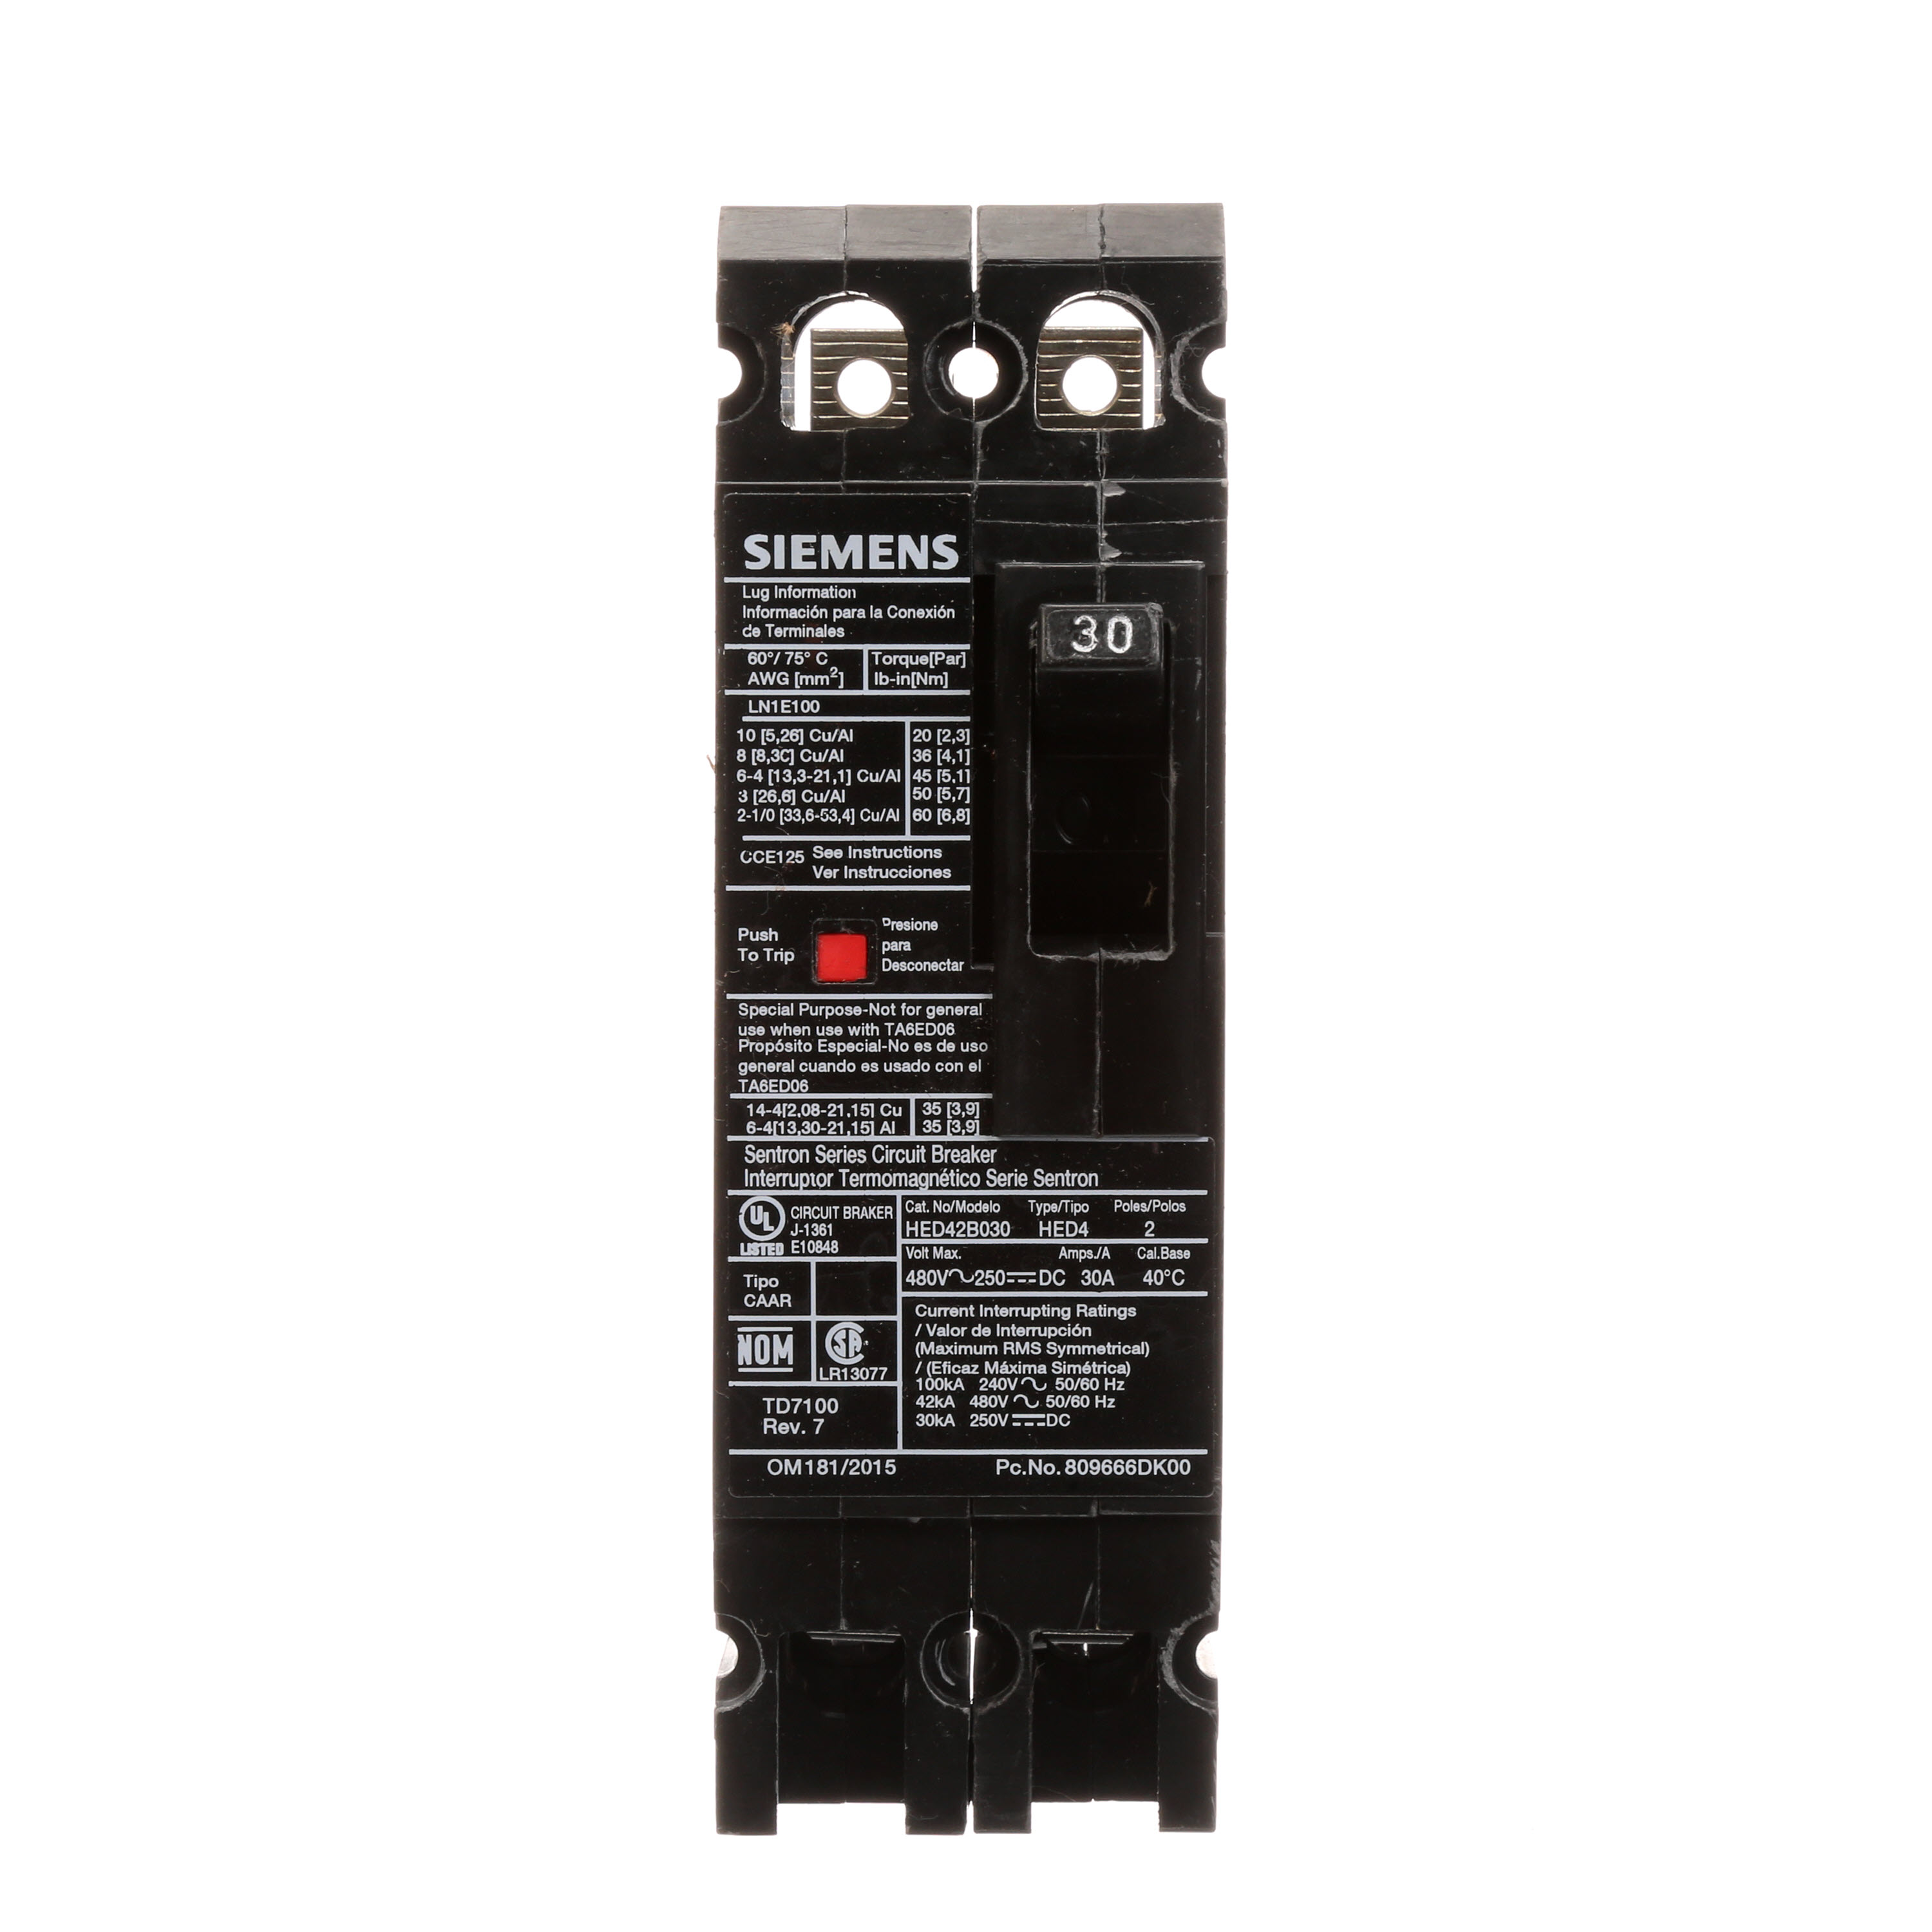 SIEMENS LOW VOLTAGE SENTRON MOLDED CASE CIRCUIT BREAKER WITH THERMAL - MAGNETICTRIP UNIT. STANDARD 40 DEG C BREAKER ED FRAME WITH HIGH BREAKING CAPACITY. 30A 2-POLE (42KAIC AT 480V). NON-INTERCHANGEABLE TRIP UNIT. SPECIAL FEATURES LOAD LUGS ONLY (LN1E100) WIRE RANGE 10 - 1/0AWG (CU/AL). DIMENSIONS (W x H x D) IN 2.00x 6.4 x 3.92.